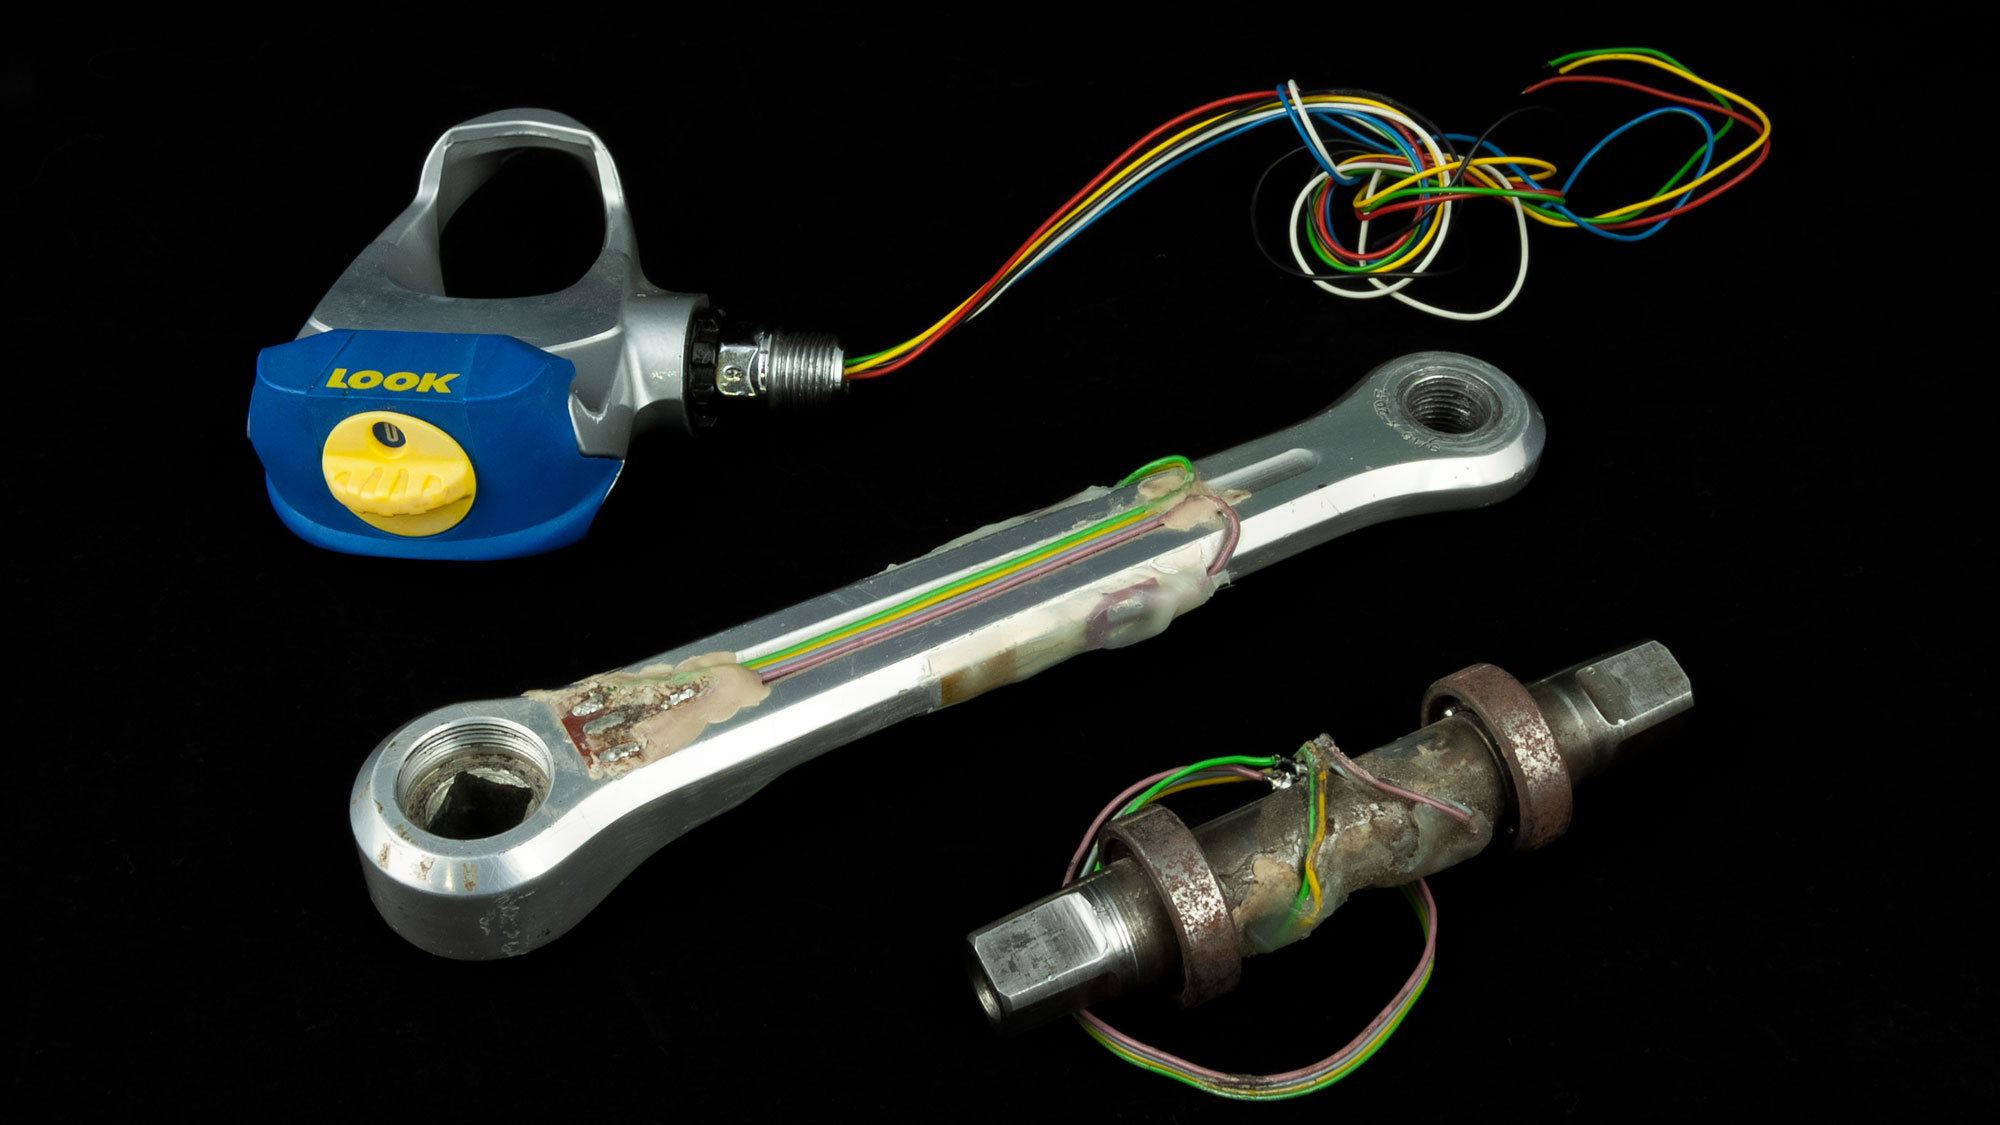 Early Pedal Power Meter, Spindle Power Meter and Crank Power Meter Prototypes